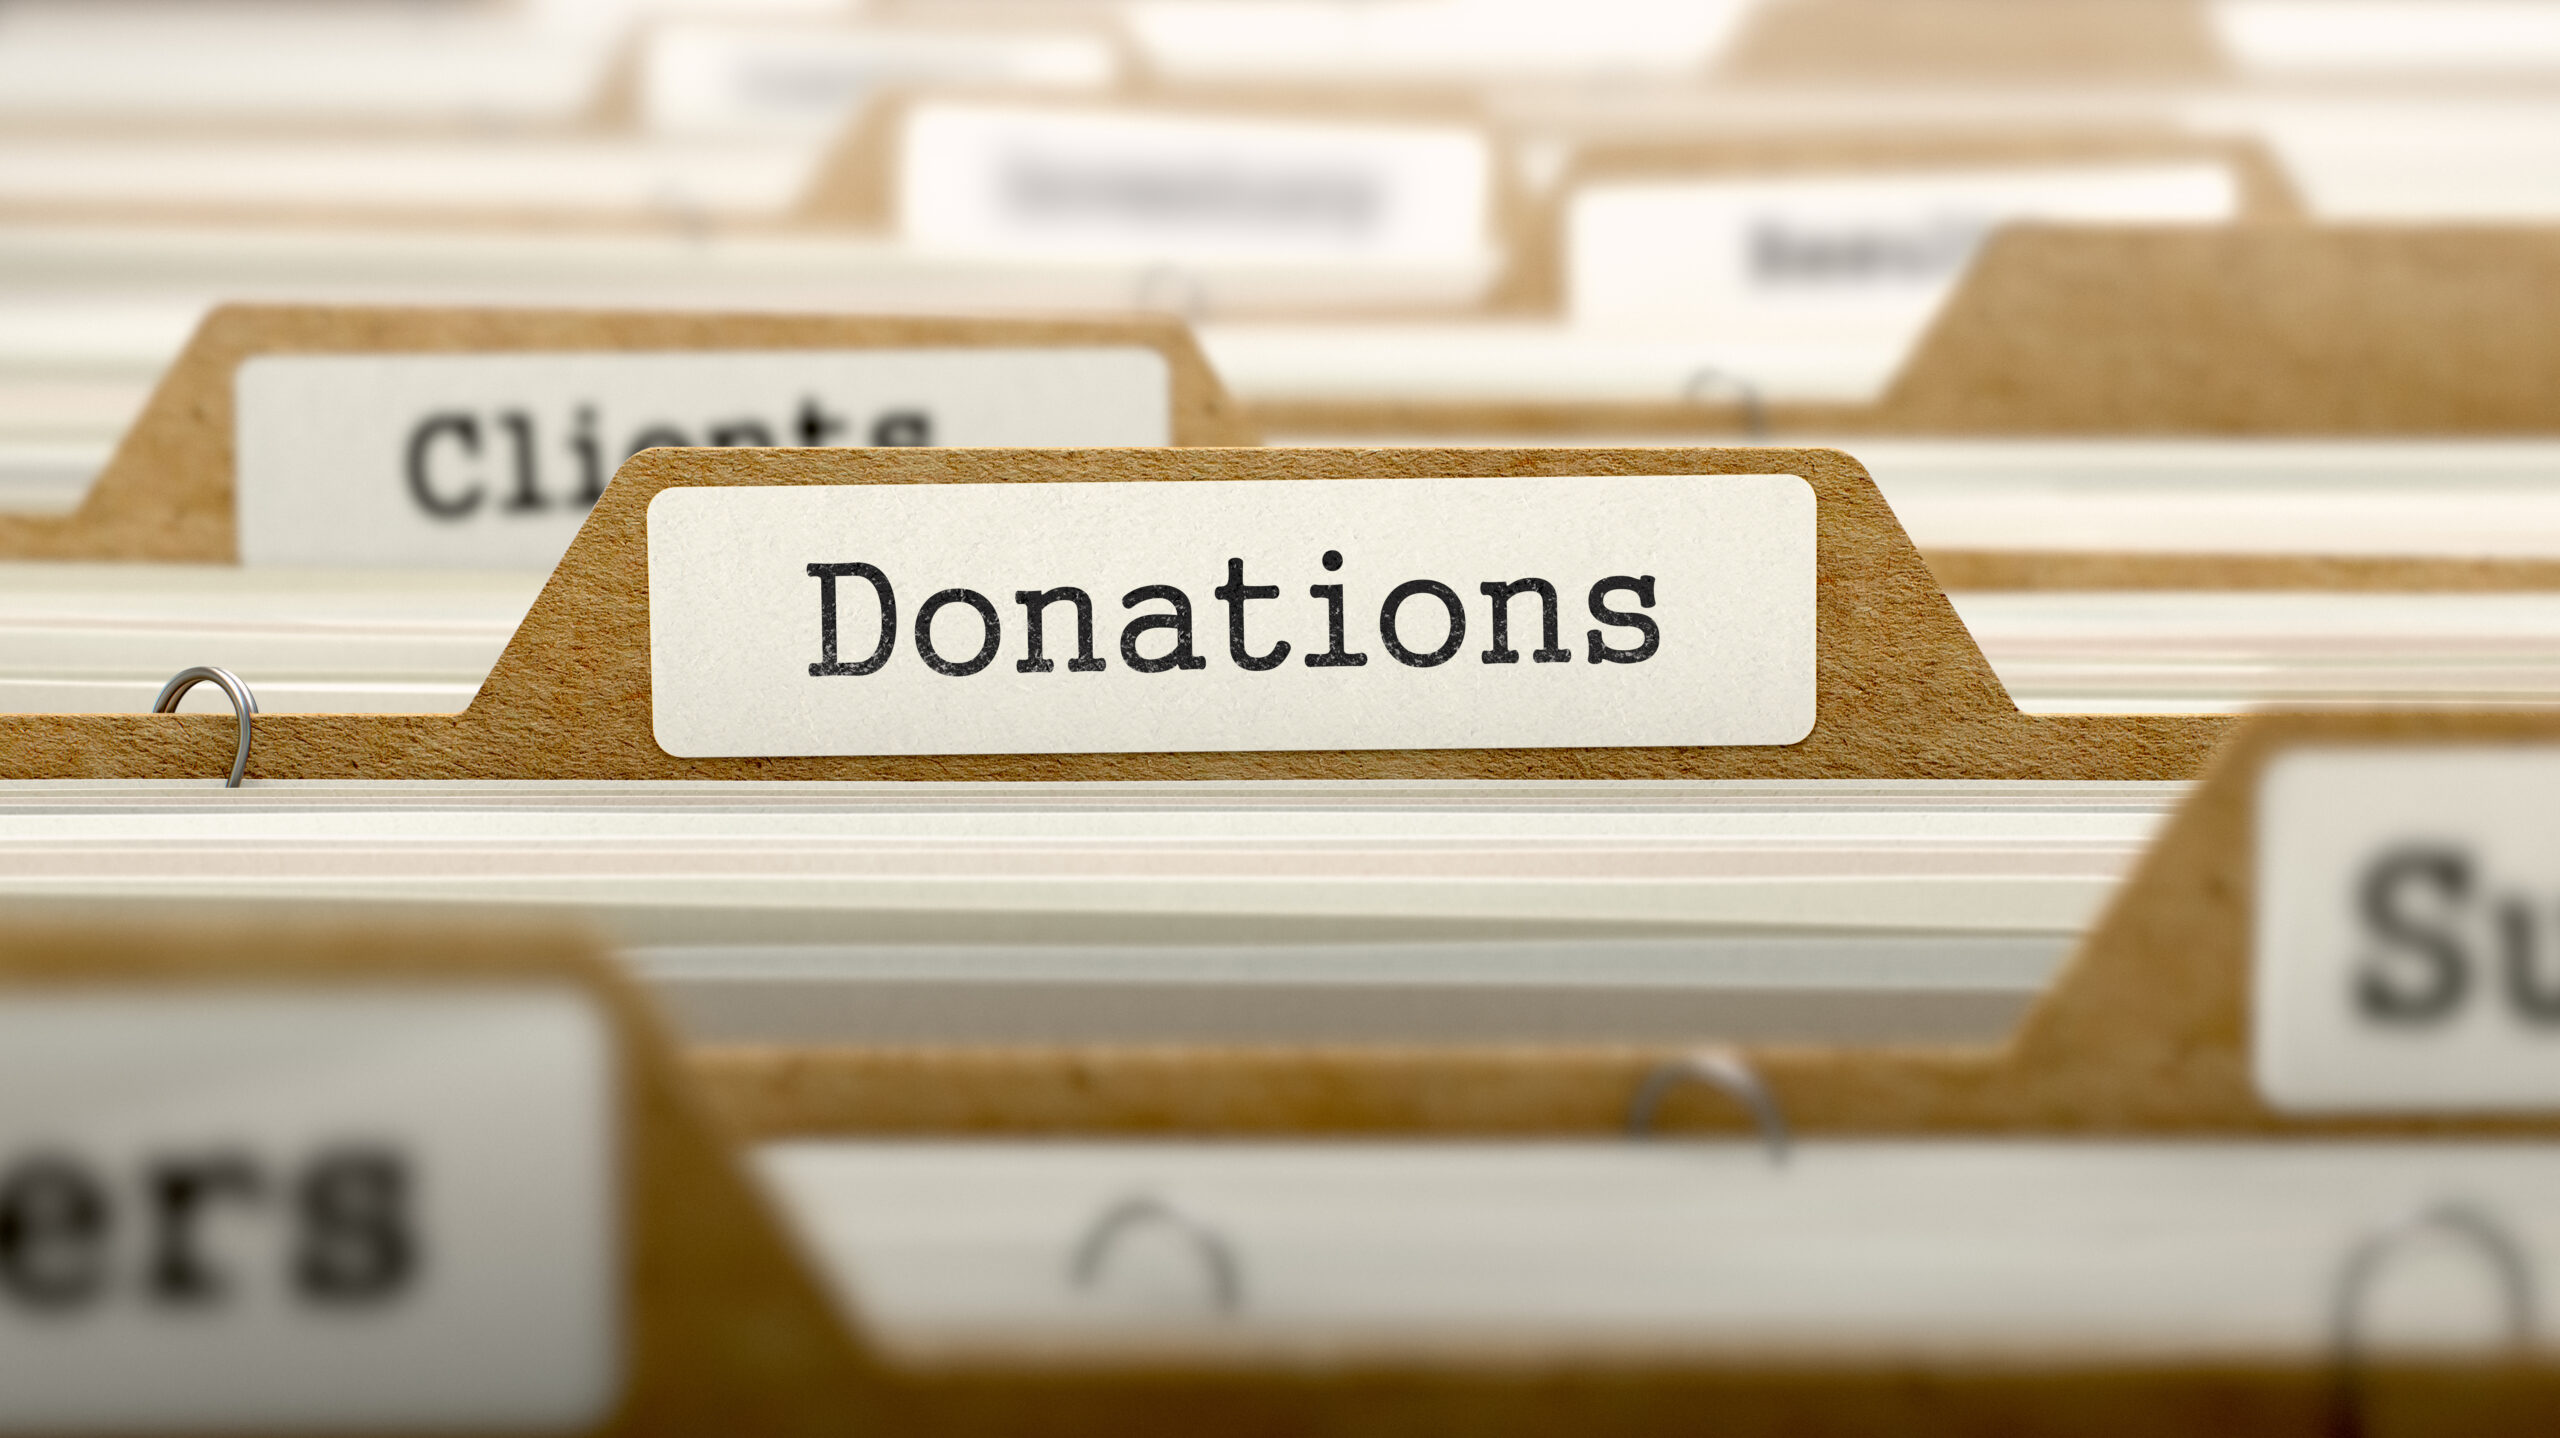 The impact of Covid-19 on charities: How Hague’s donation processing solution is supporting the organisations that continue to support those in need.